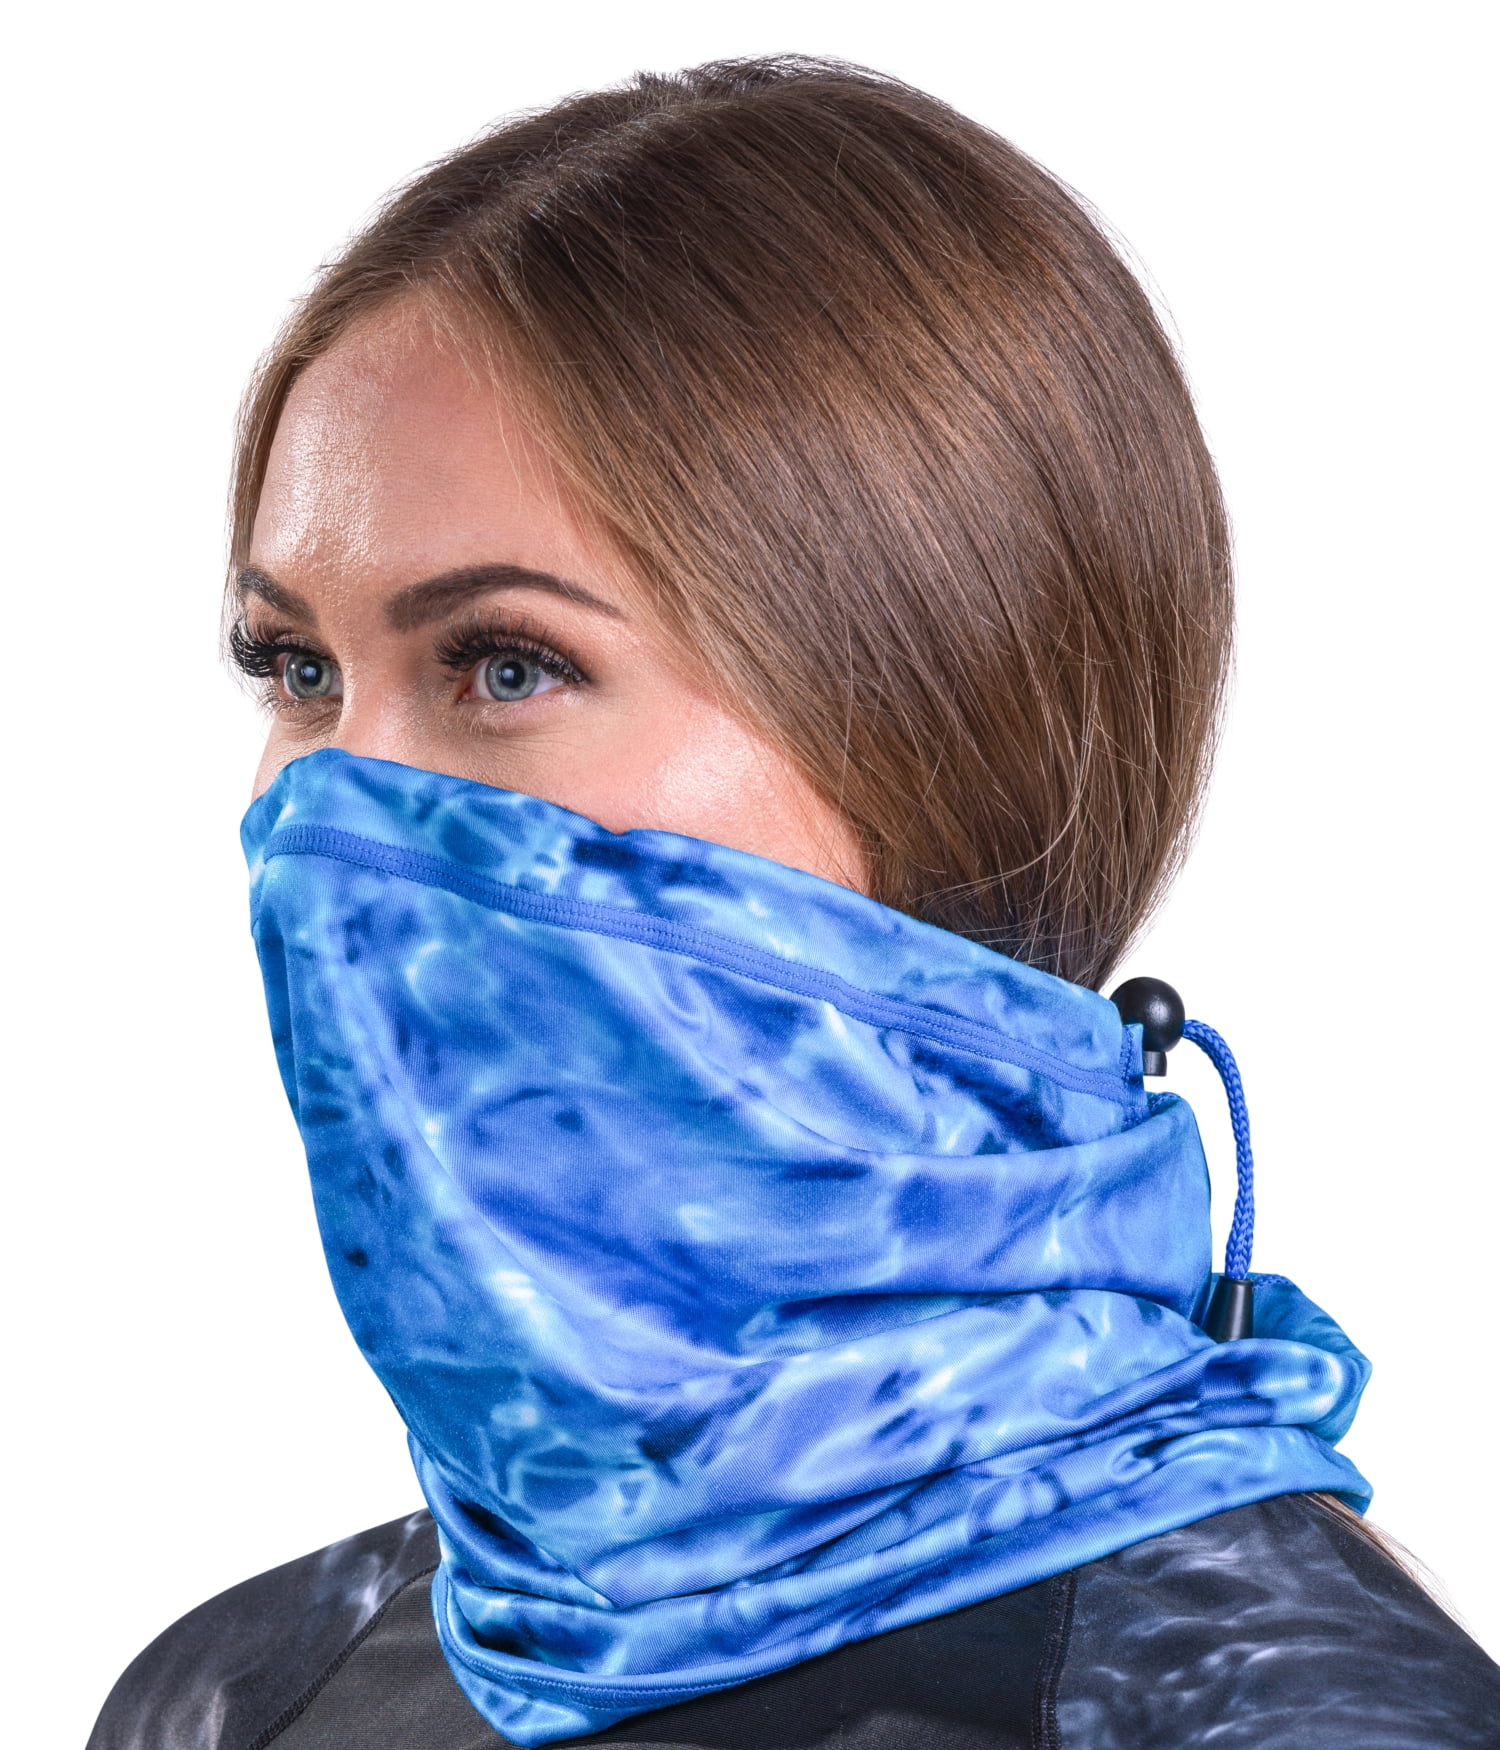 Details about   Men Women Cooling Bandana Face Cover Outdoor Anti-dust Sun Protection O6U1 